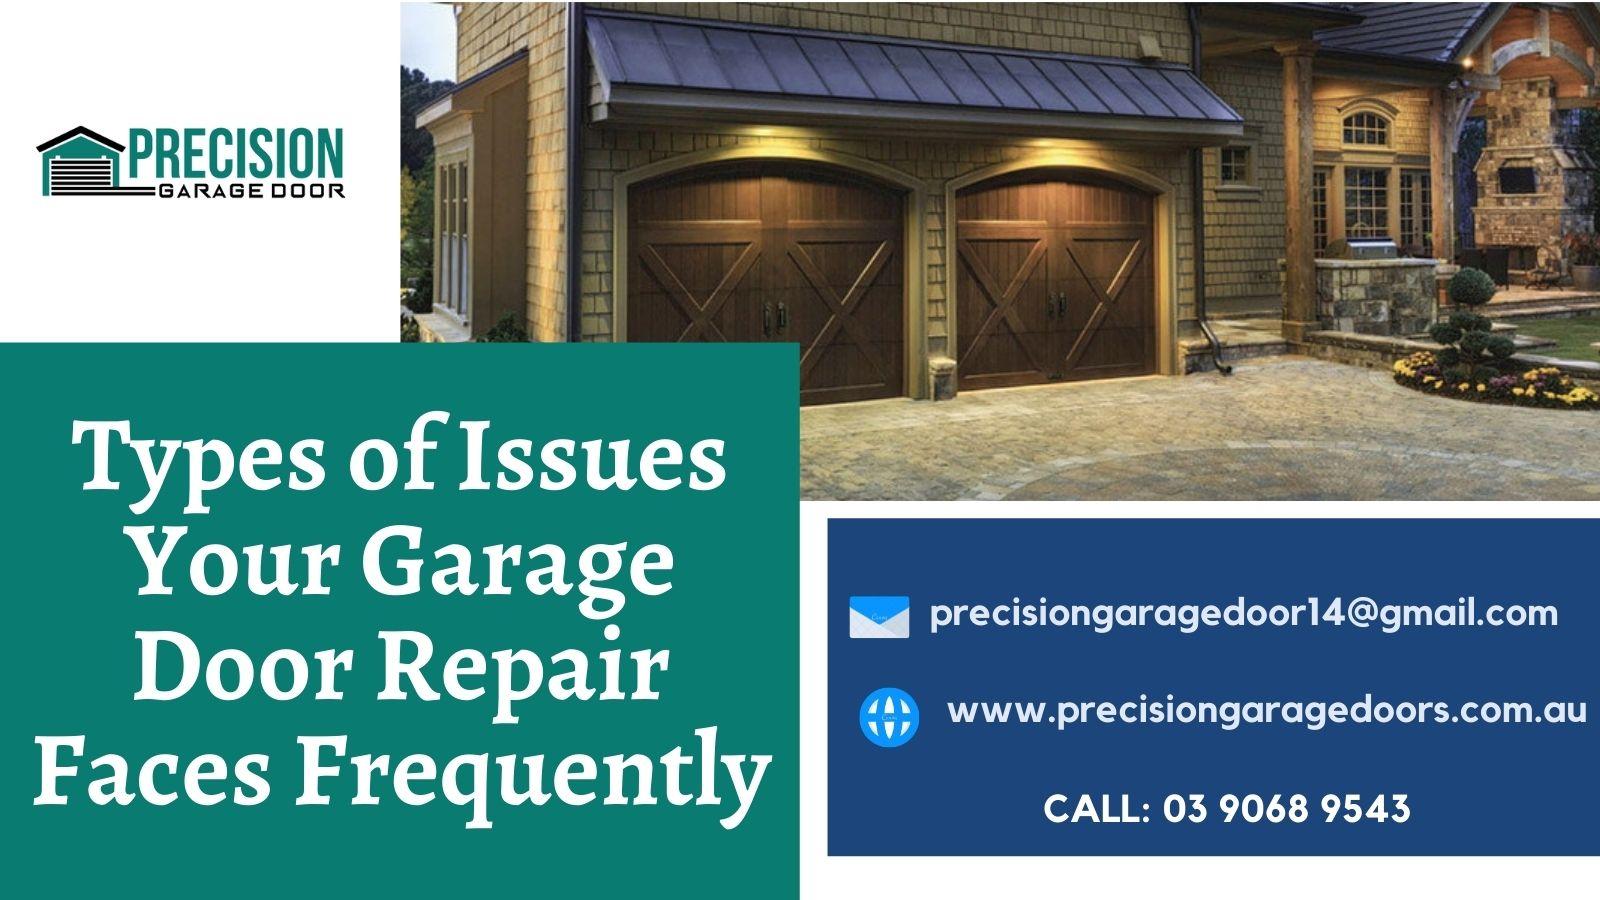 Types of Issues Your Garage Door Repair Faces Frequently